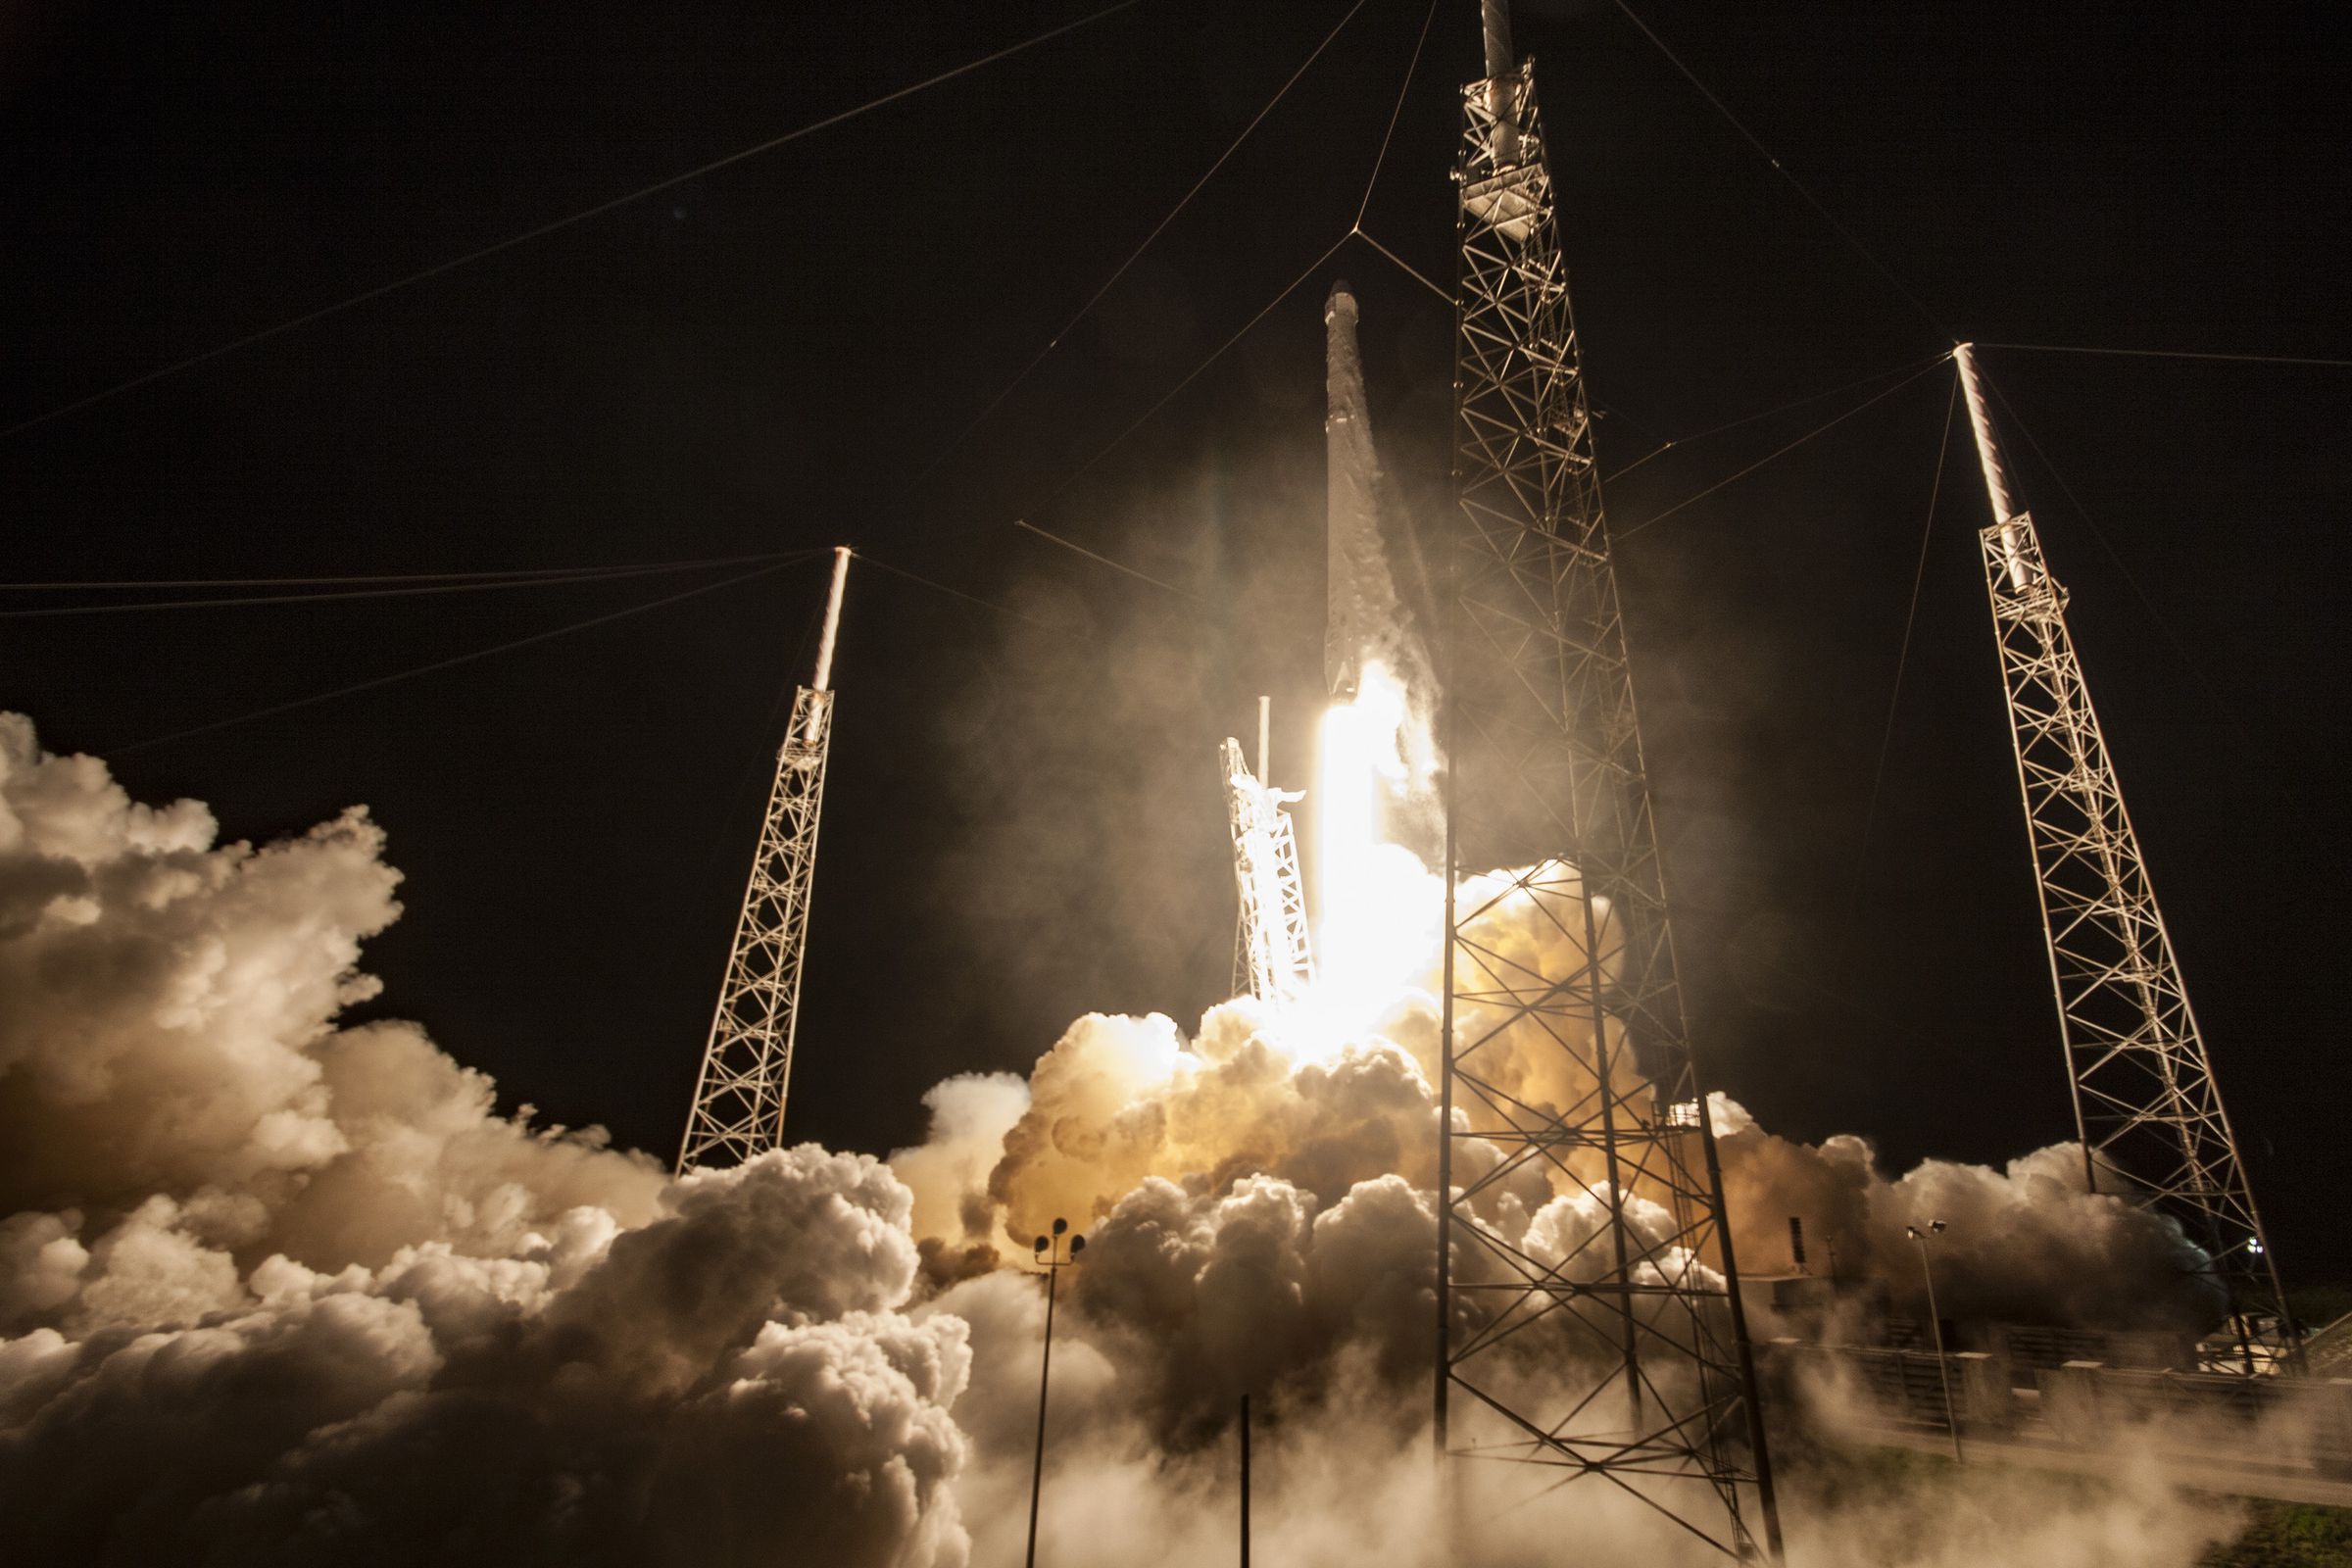 SpaceX Falcon 9 launch and landing photos